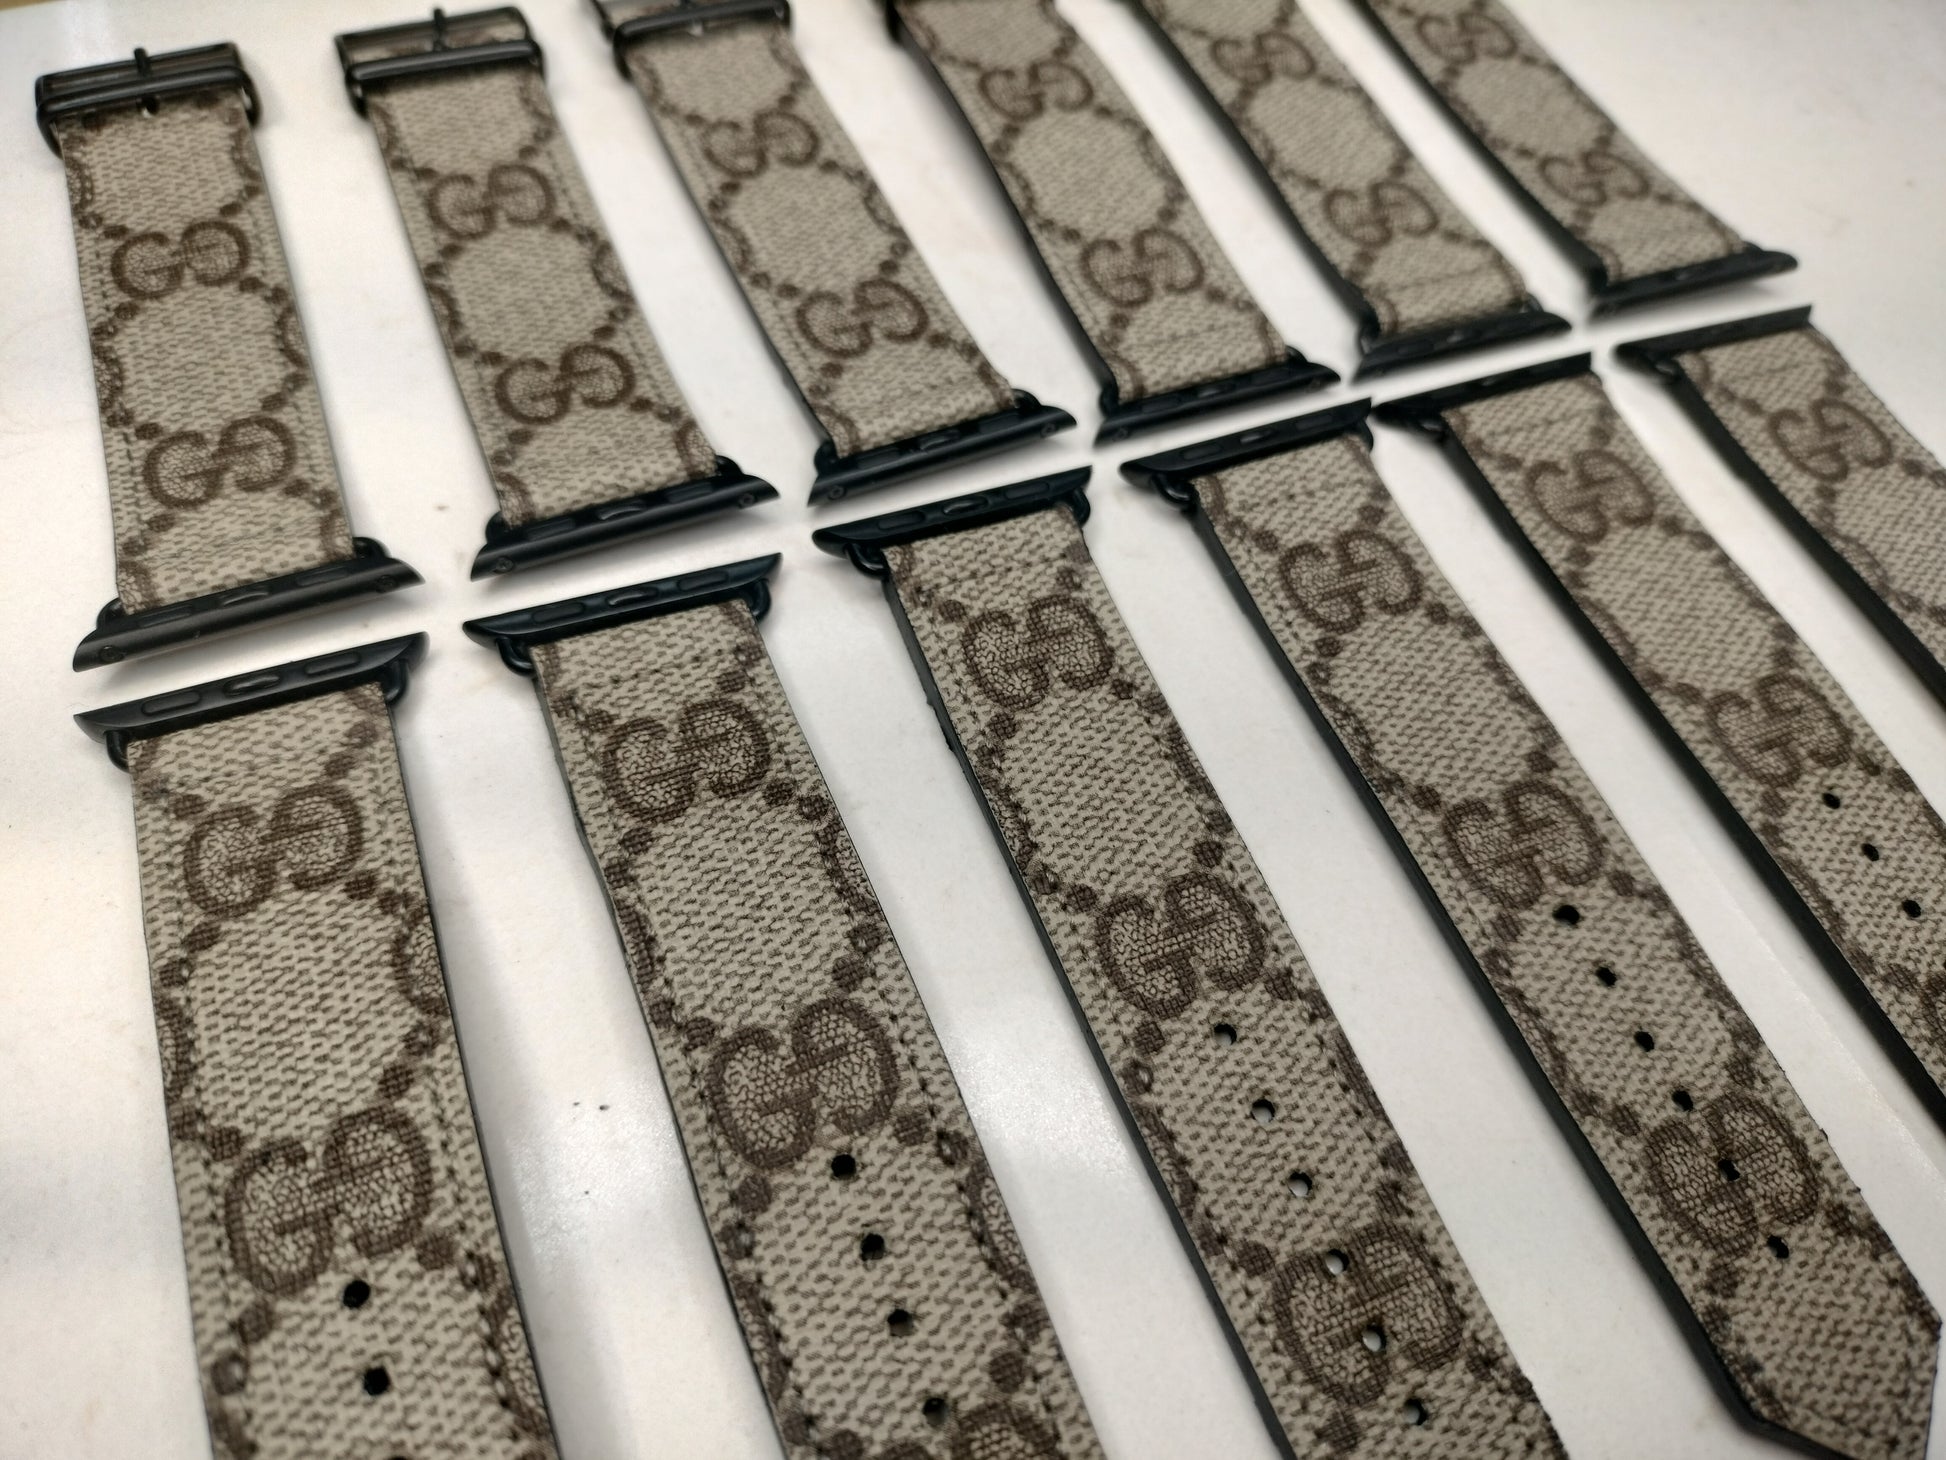 Upcycled Gucci & Louis Vuitton Apple Watch bands & Samsung Galaxy